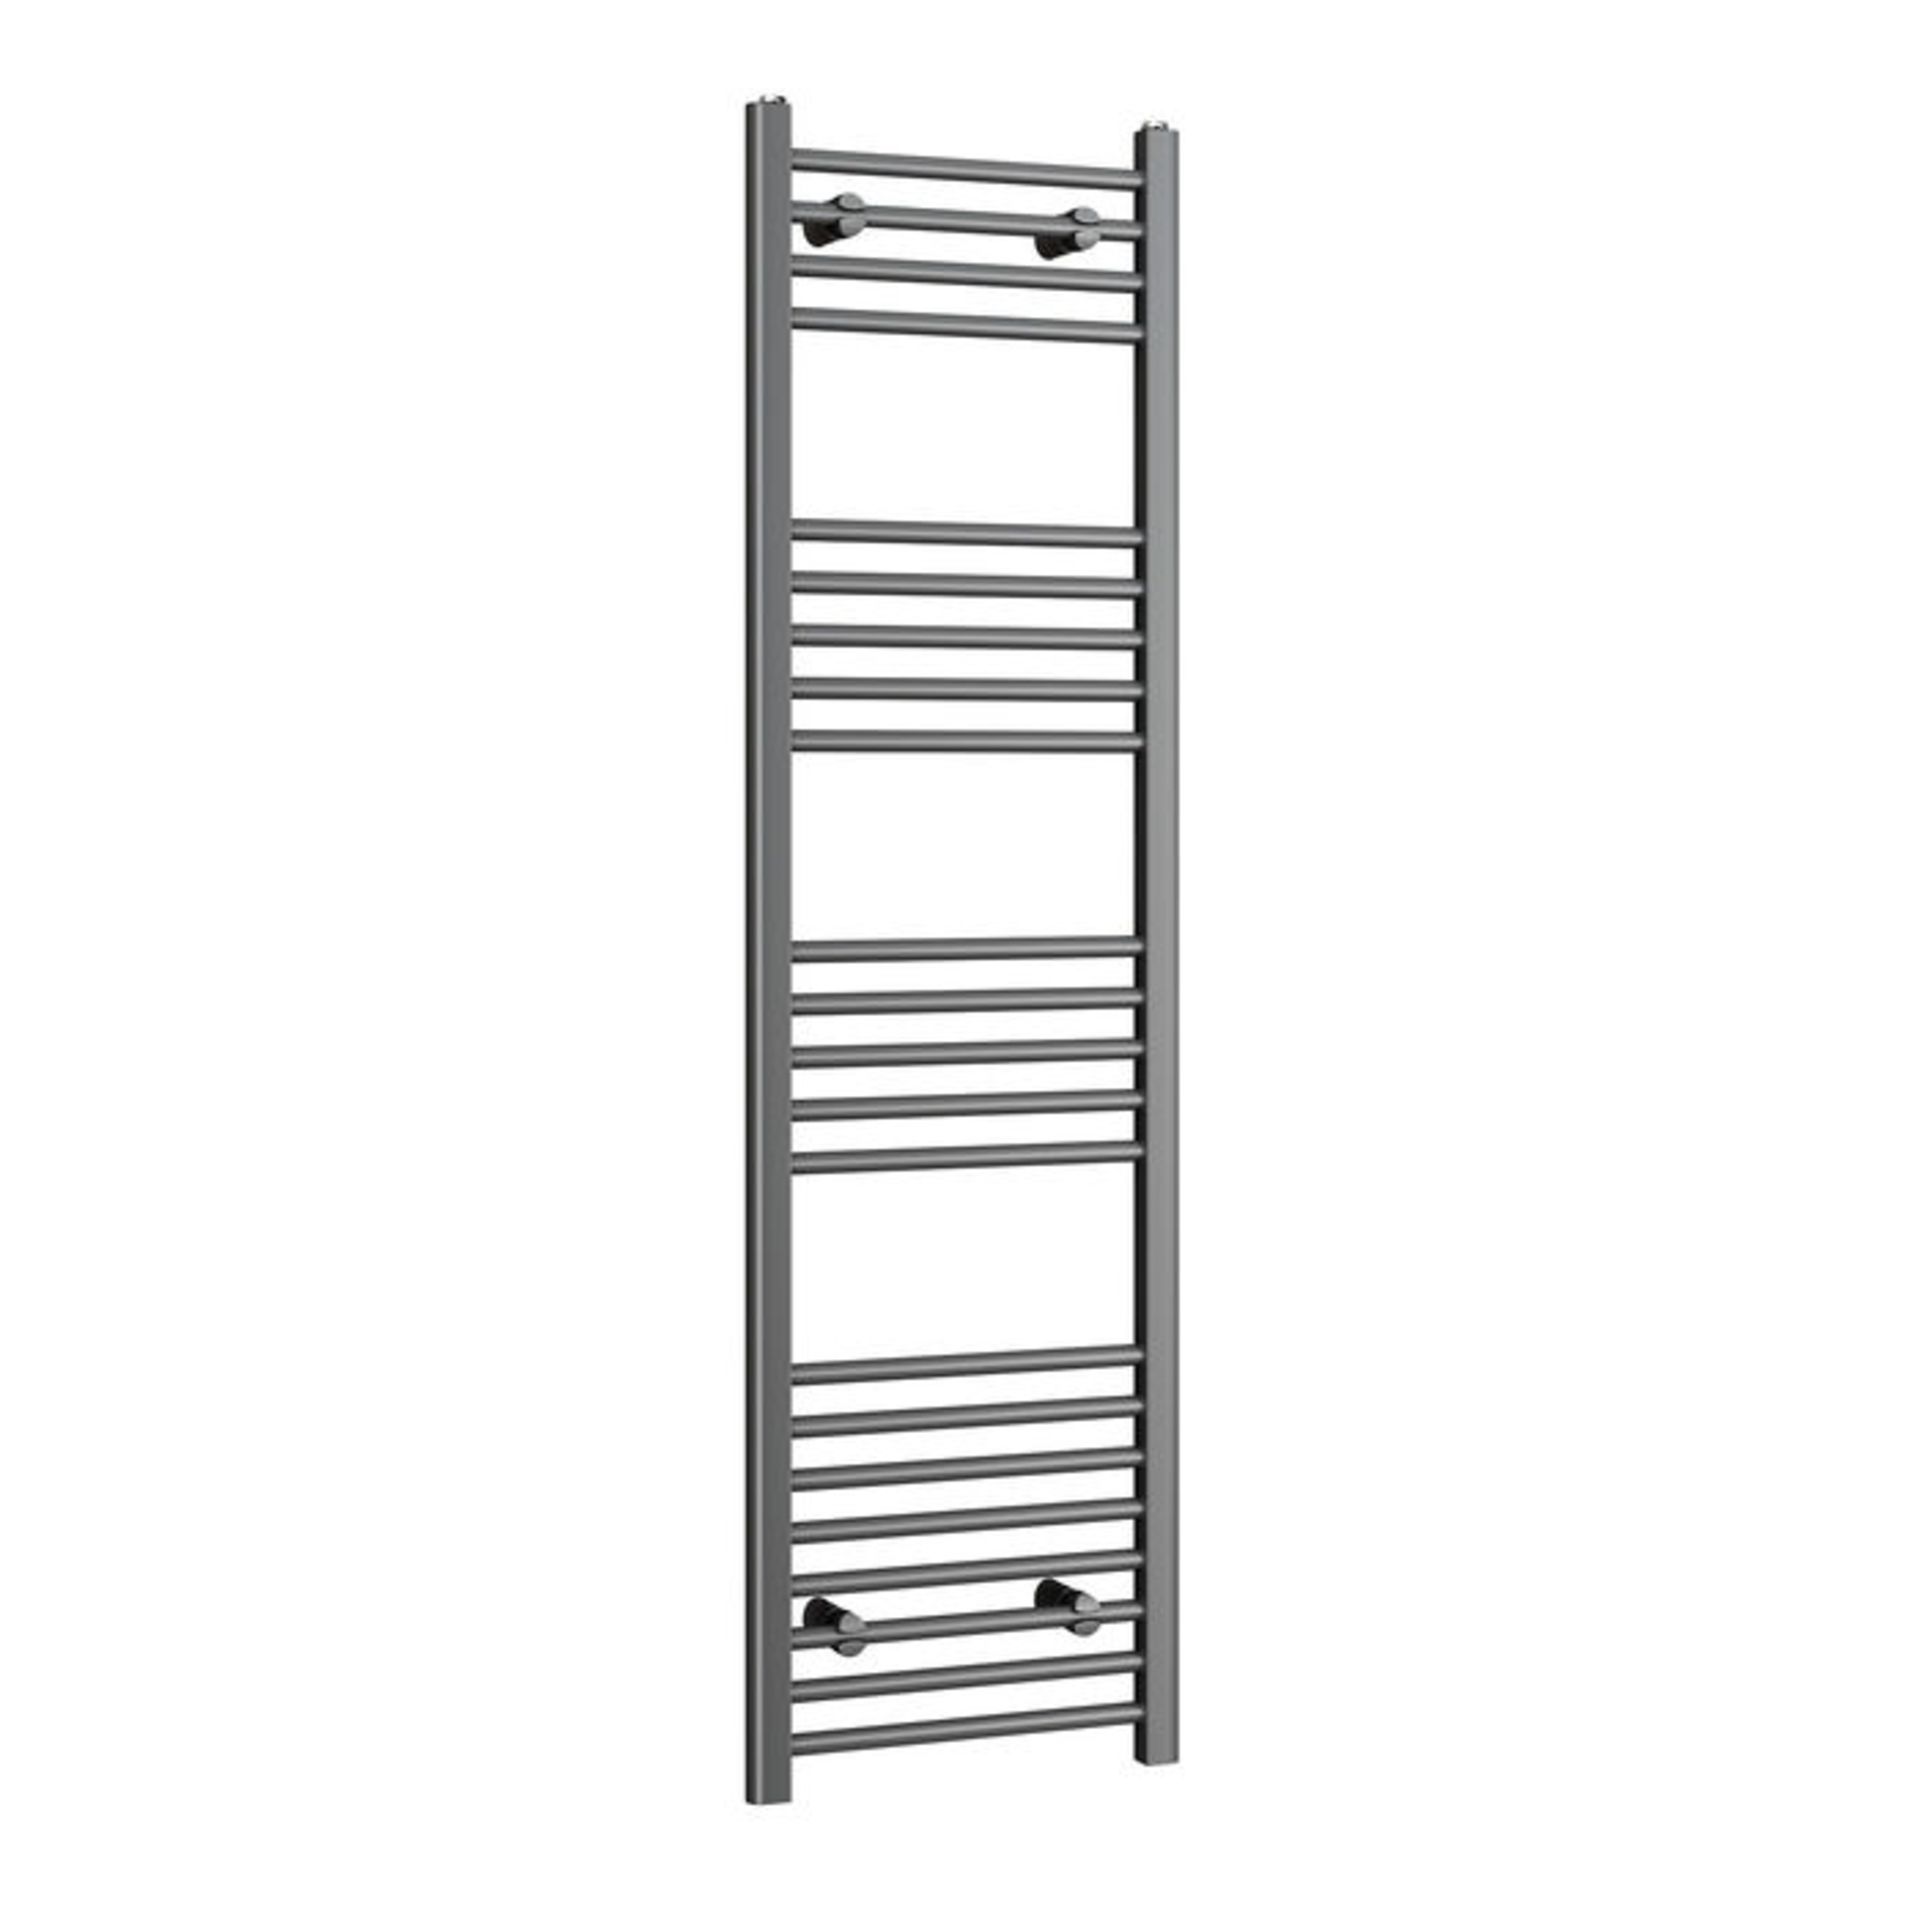 (AD259) 1800x400mm - 20mm Tubes - Anthracite Heated Straight Rail Ladder Towel Radiator. RRP £209. - Image 2 of 4